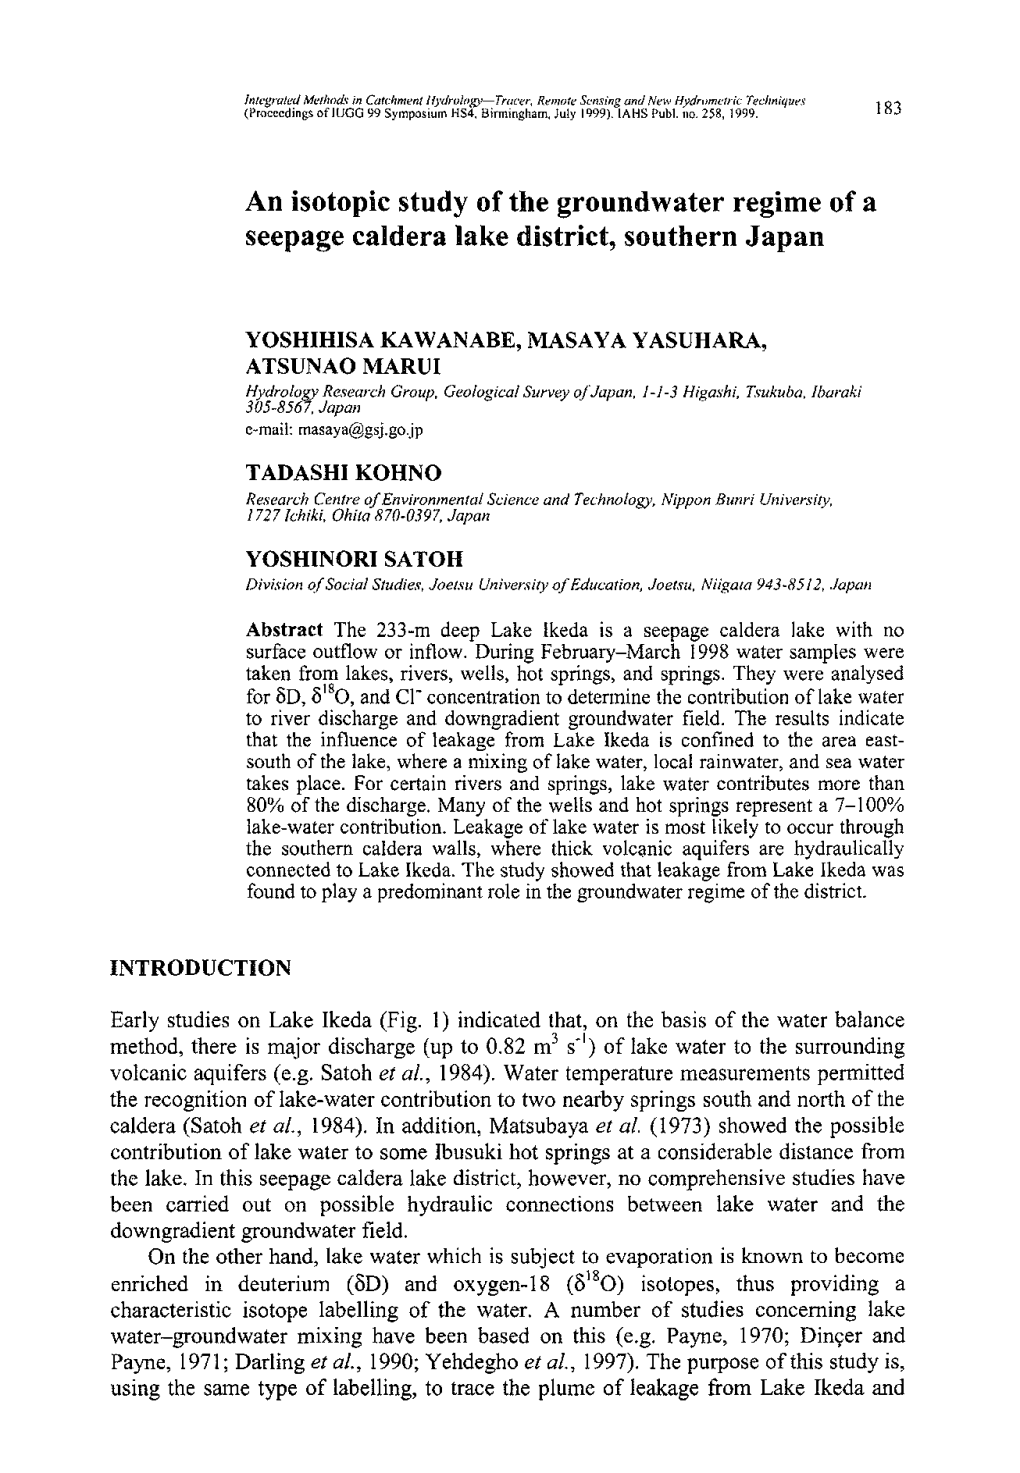 An Isotopic Study of the Groundwater Regime of a Seepage Caldera Lake District, Southern Japan